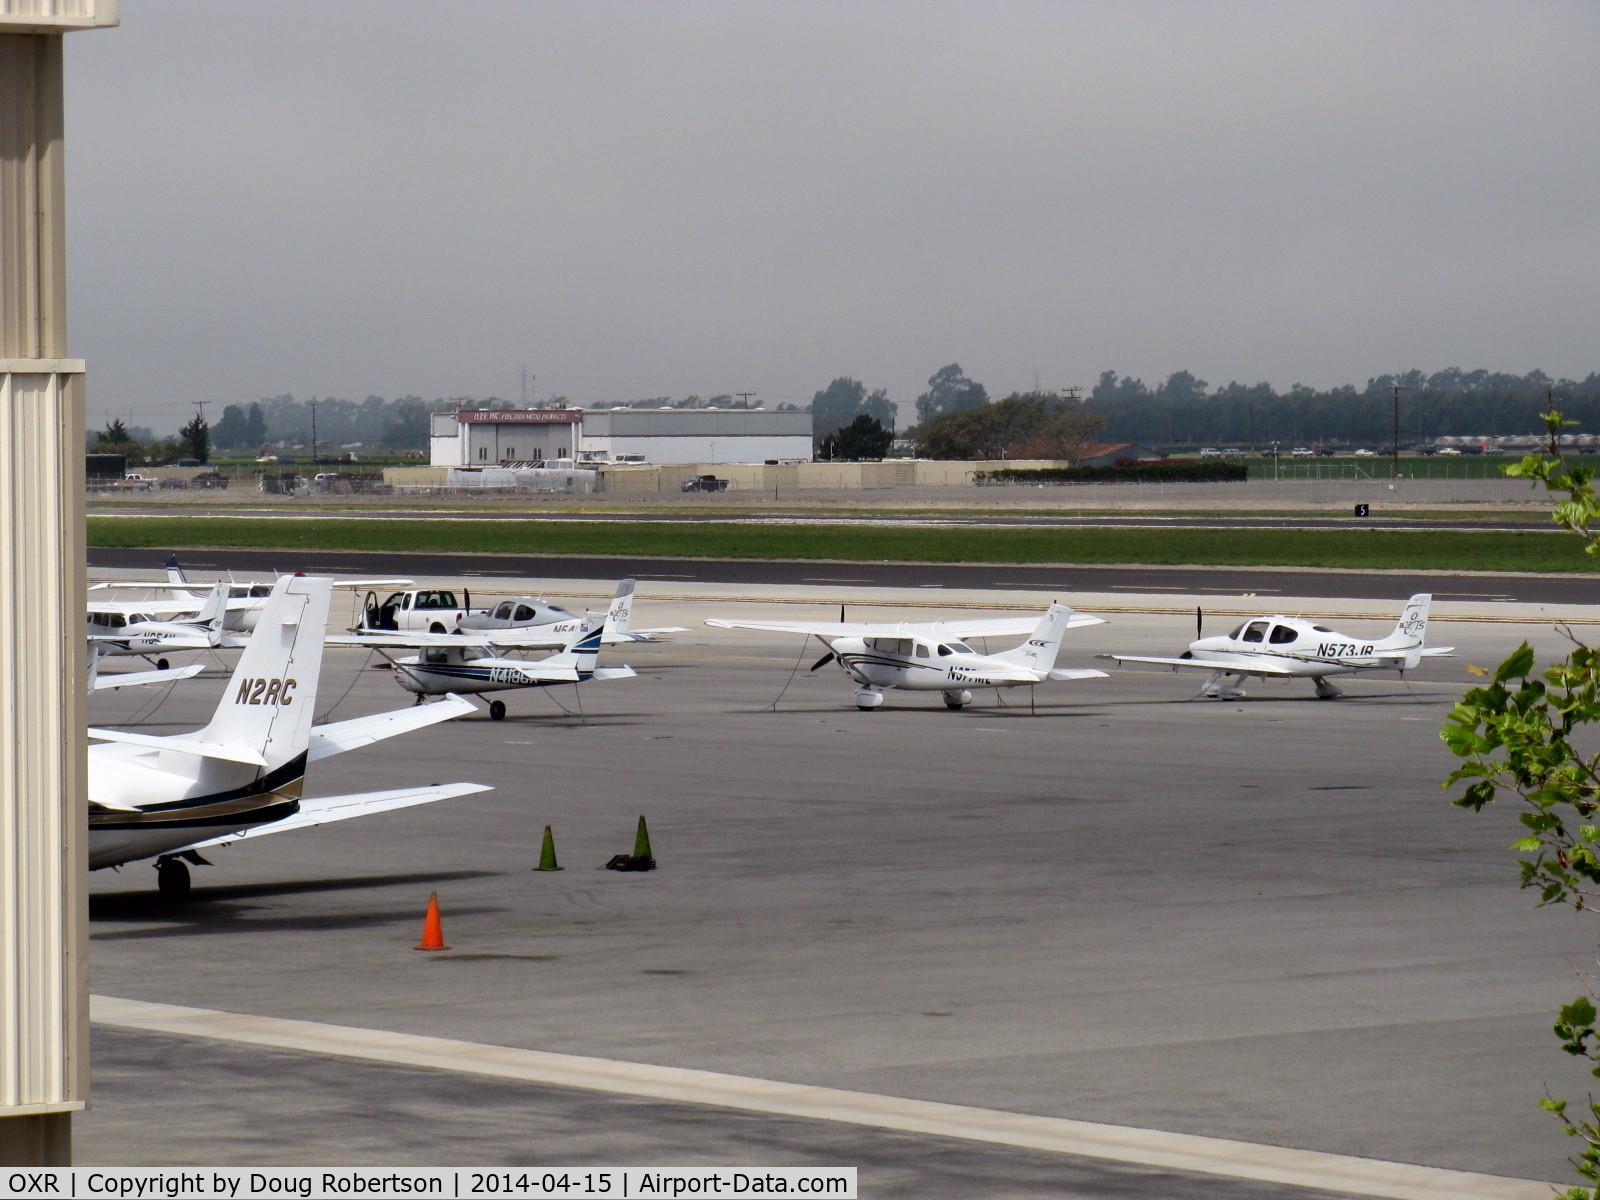 Oxnard Airport (OXR) - Unusually occupied GA ramp because nearby Camarillo CMA's sole runway is closed for maintenance. CMA tower diverting aircraft to OXR with some CMA-based aircraft departing early to OXR before the closure